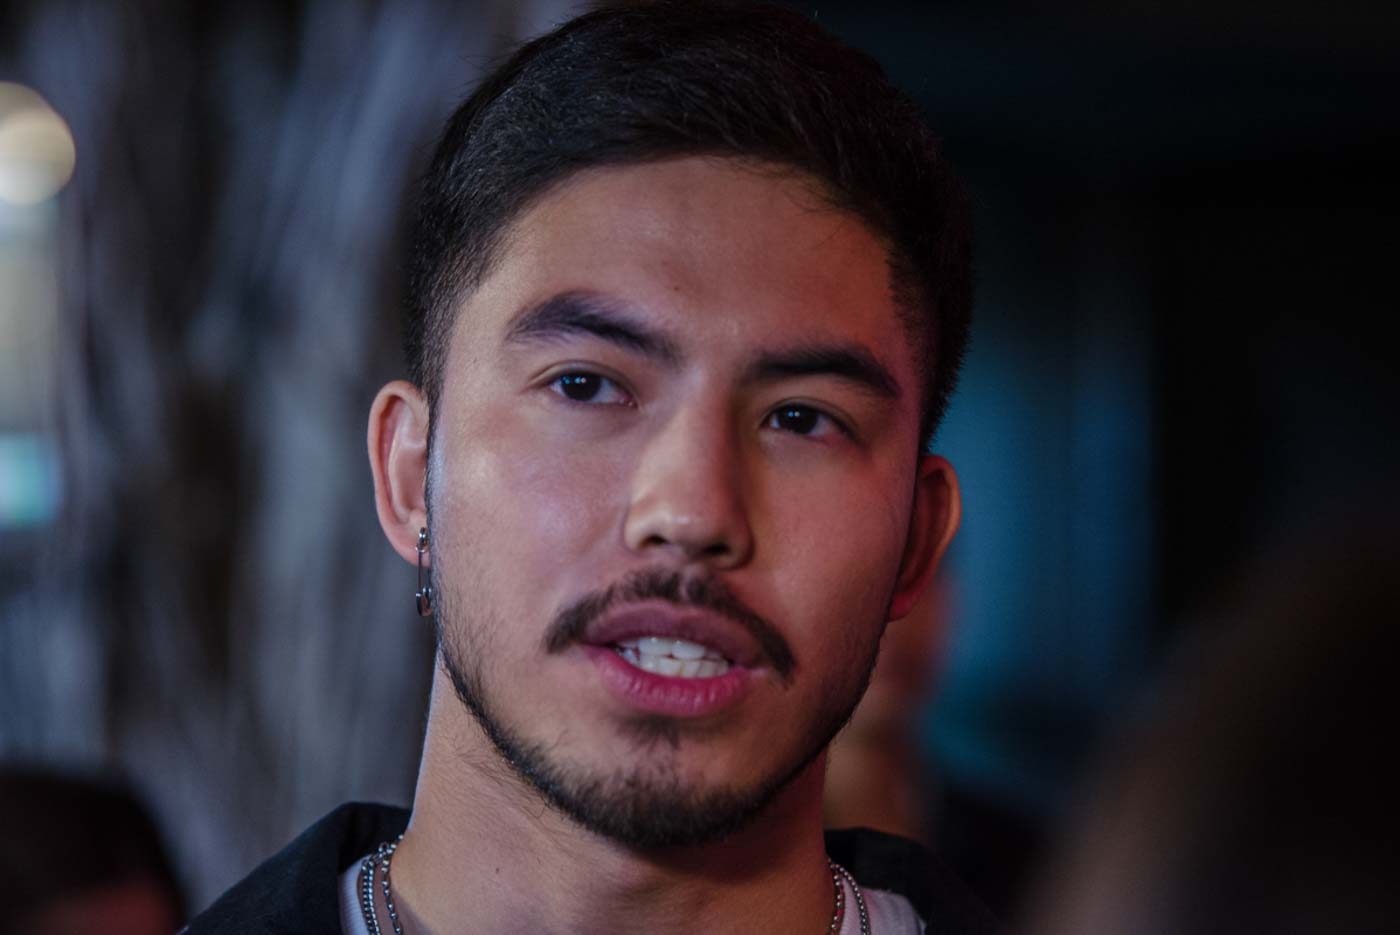 Woman sues Tony Labrusca for acts of lasciviousness